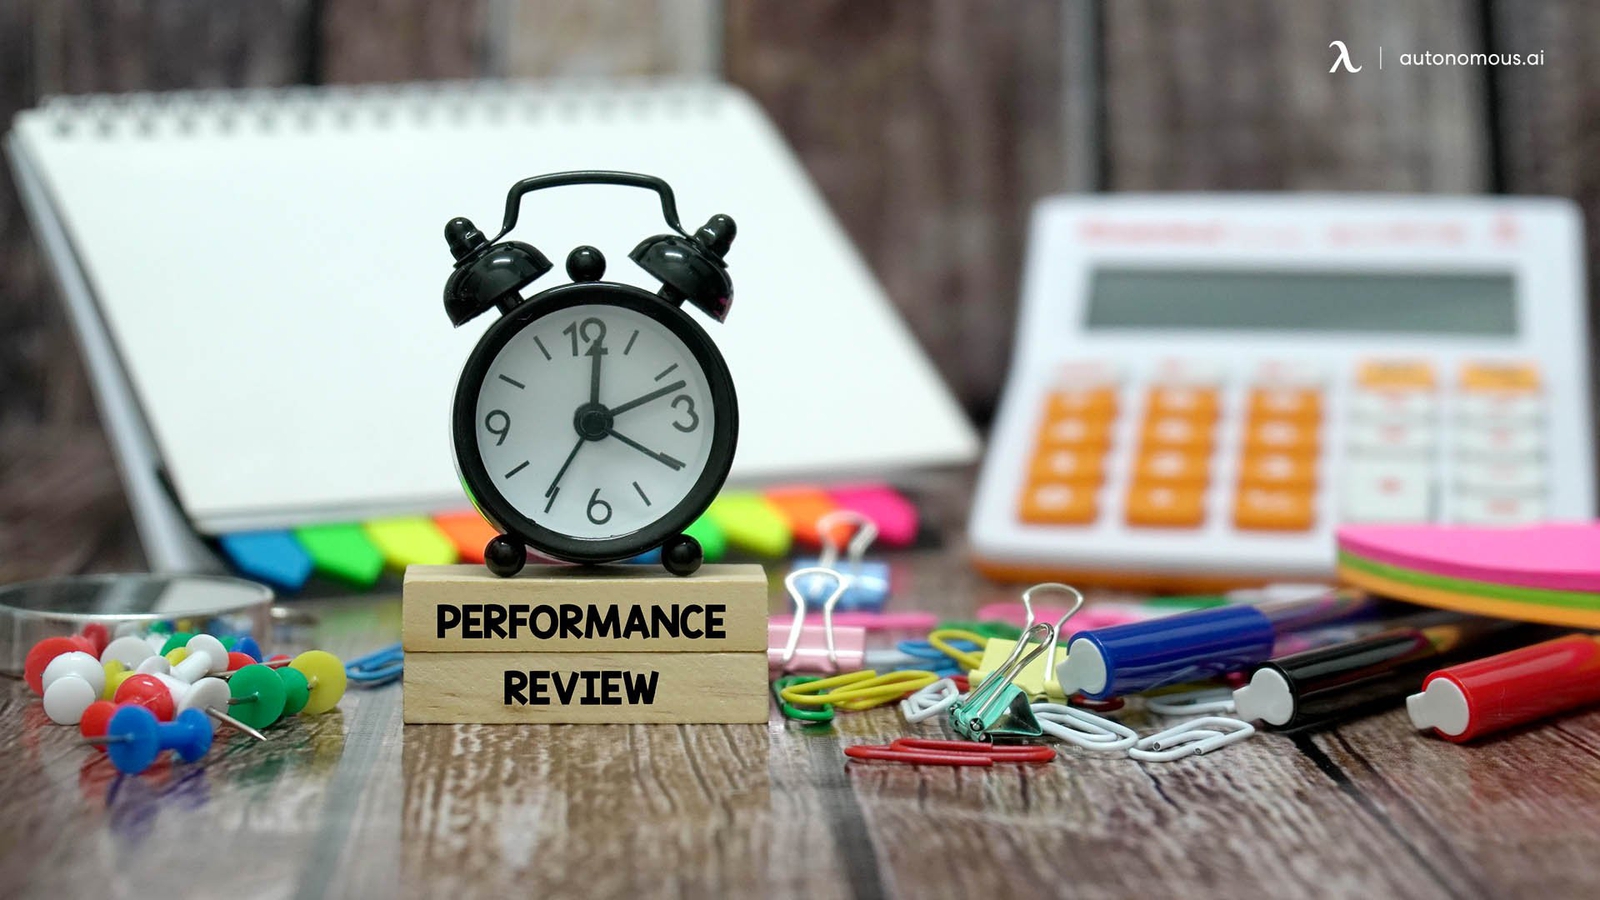 What Are The Different Types Of Performance Appraisal Methods?